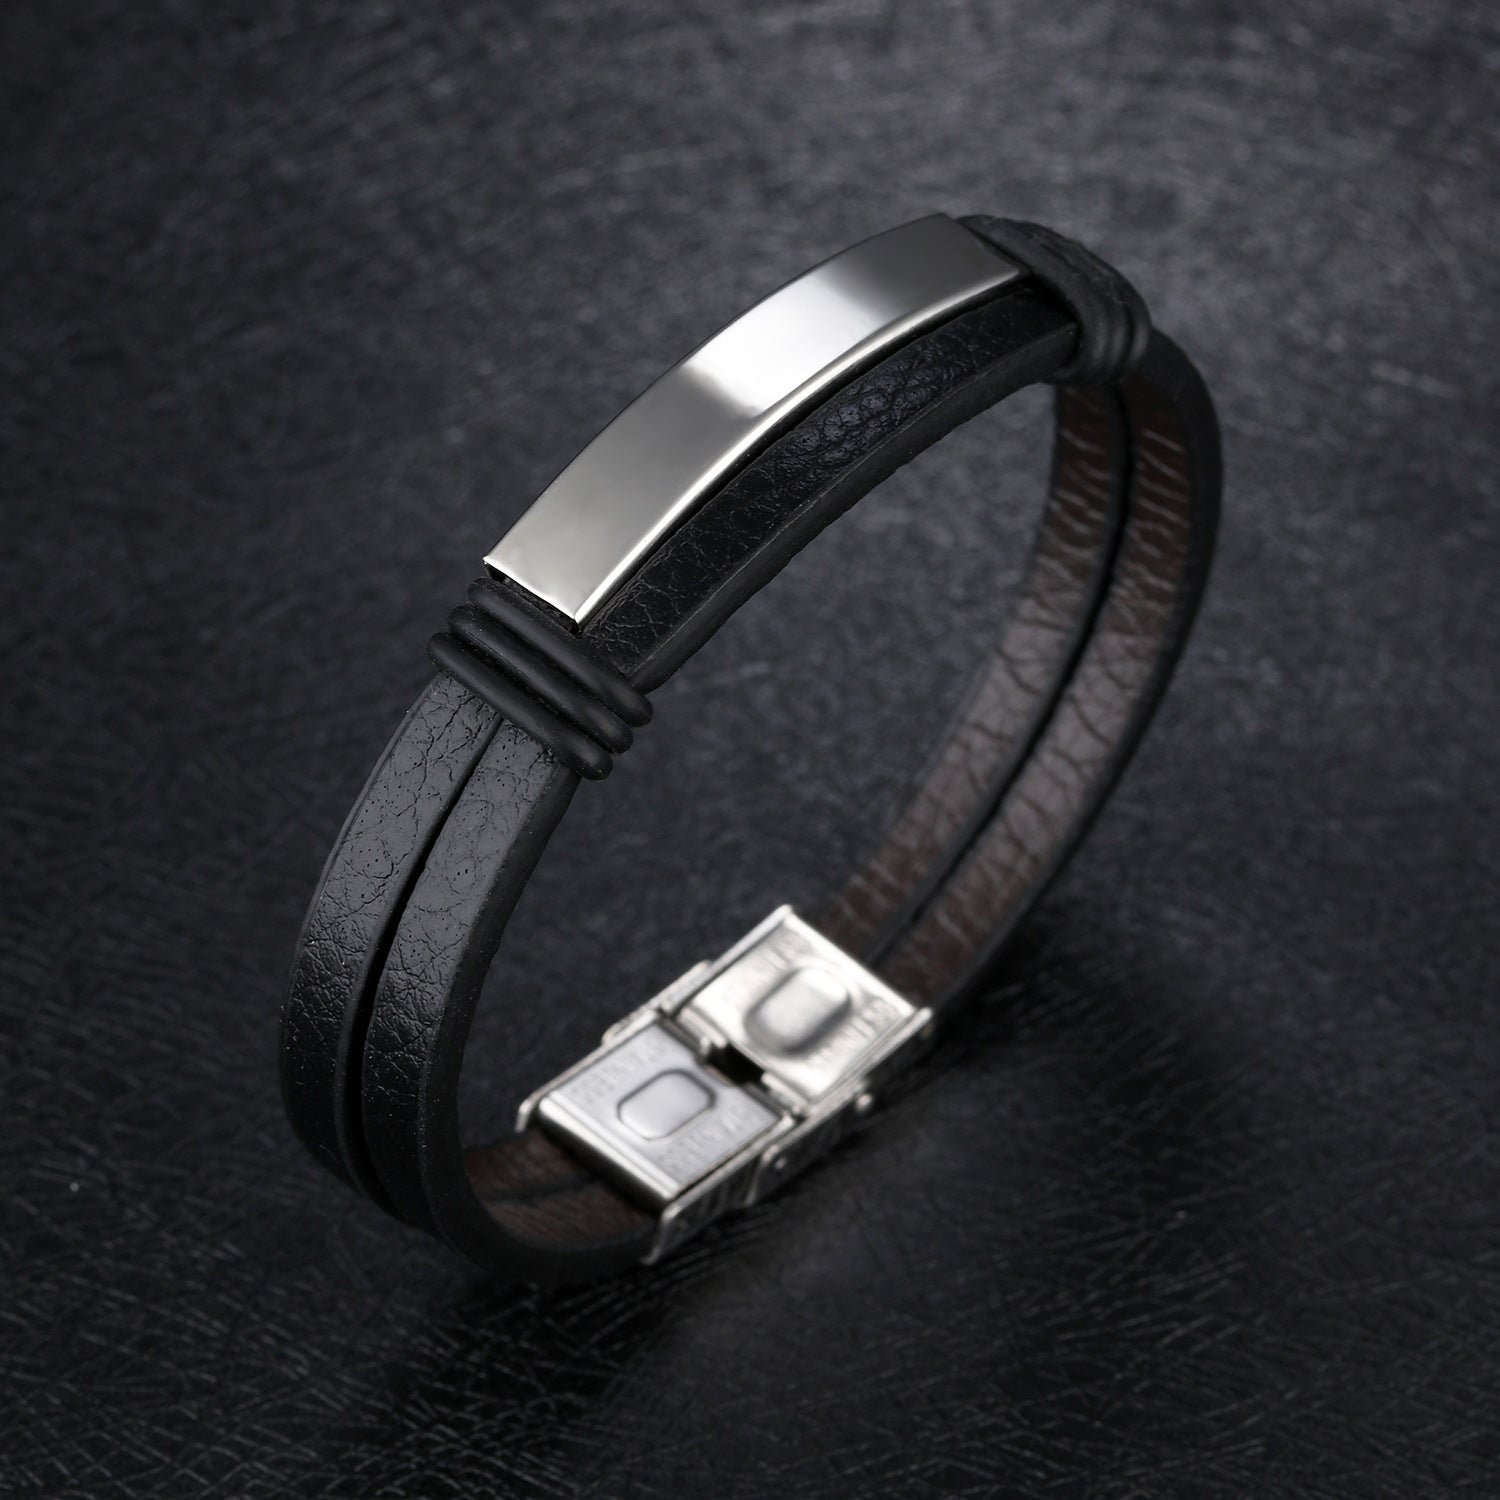 Stainless Steel Plate and Clasps with Black Calf Leather